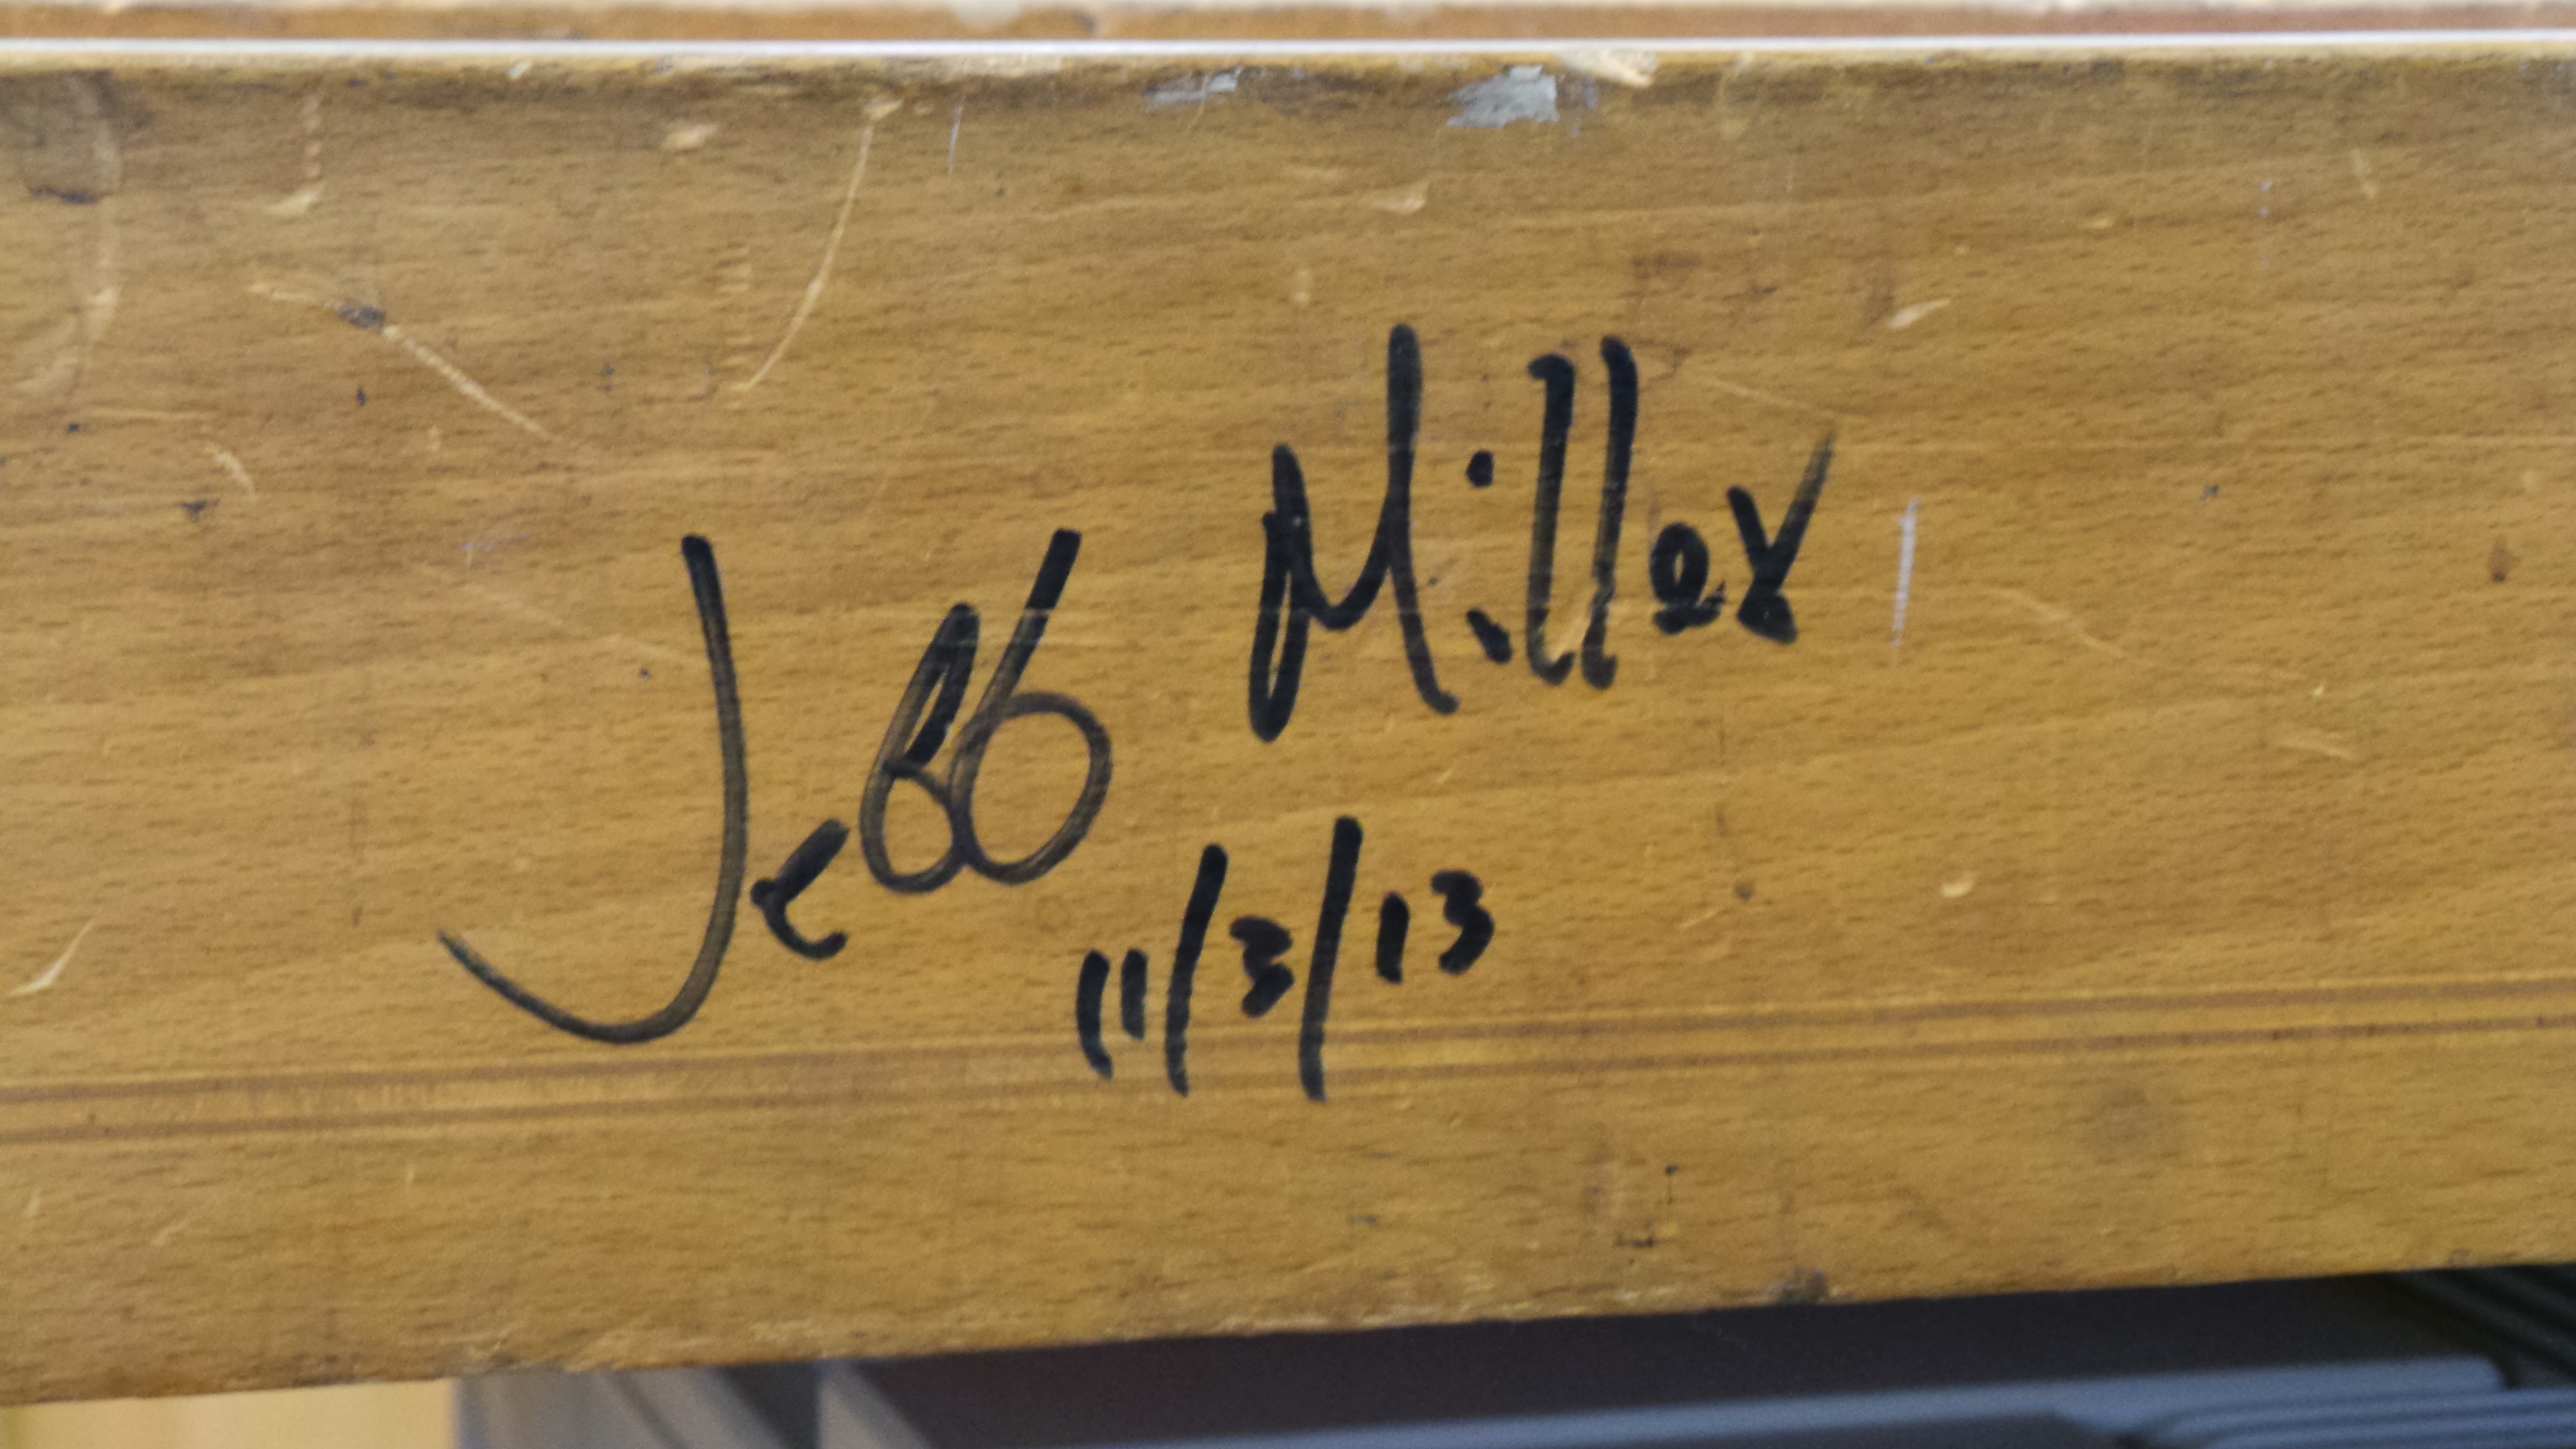 Jeff’s signature on the instructor’s bench at Highland.